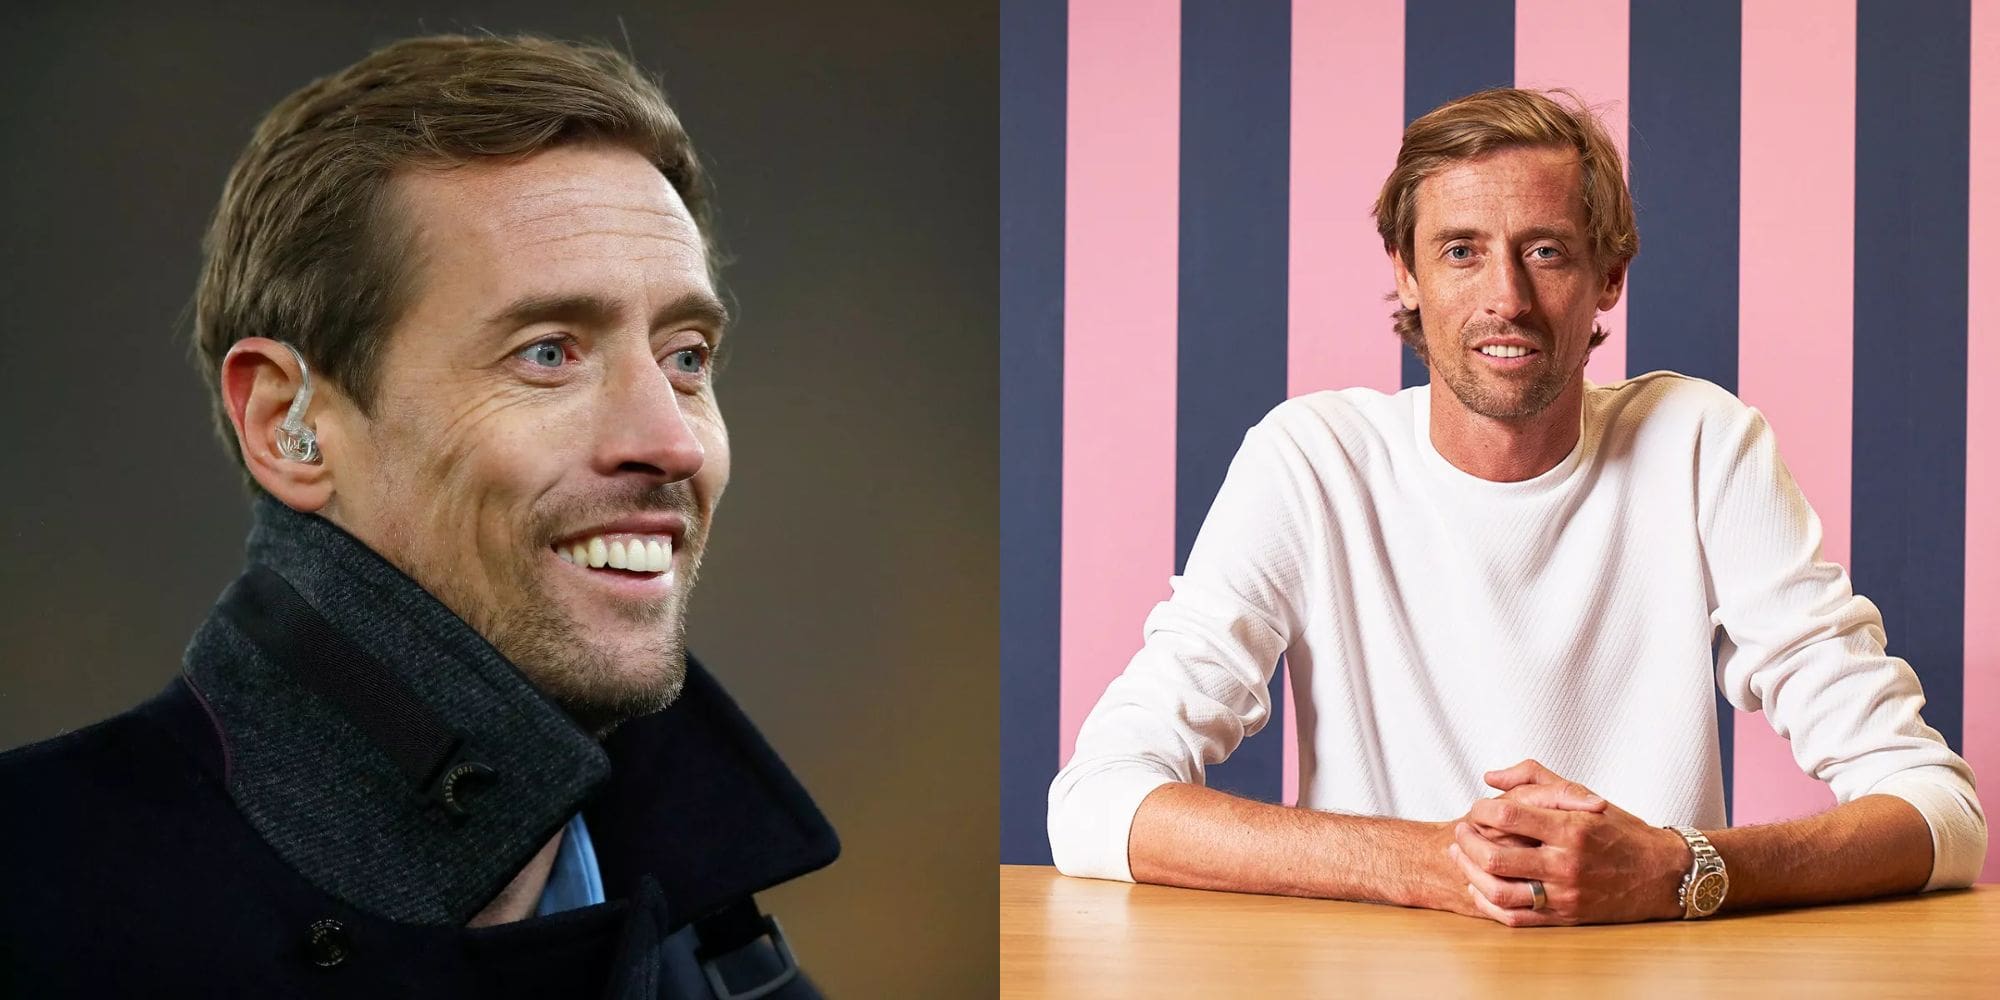 Peter Crouch New Partner: Is He Married to Abbey Clancy?